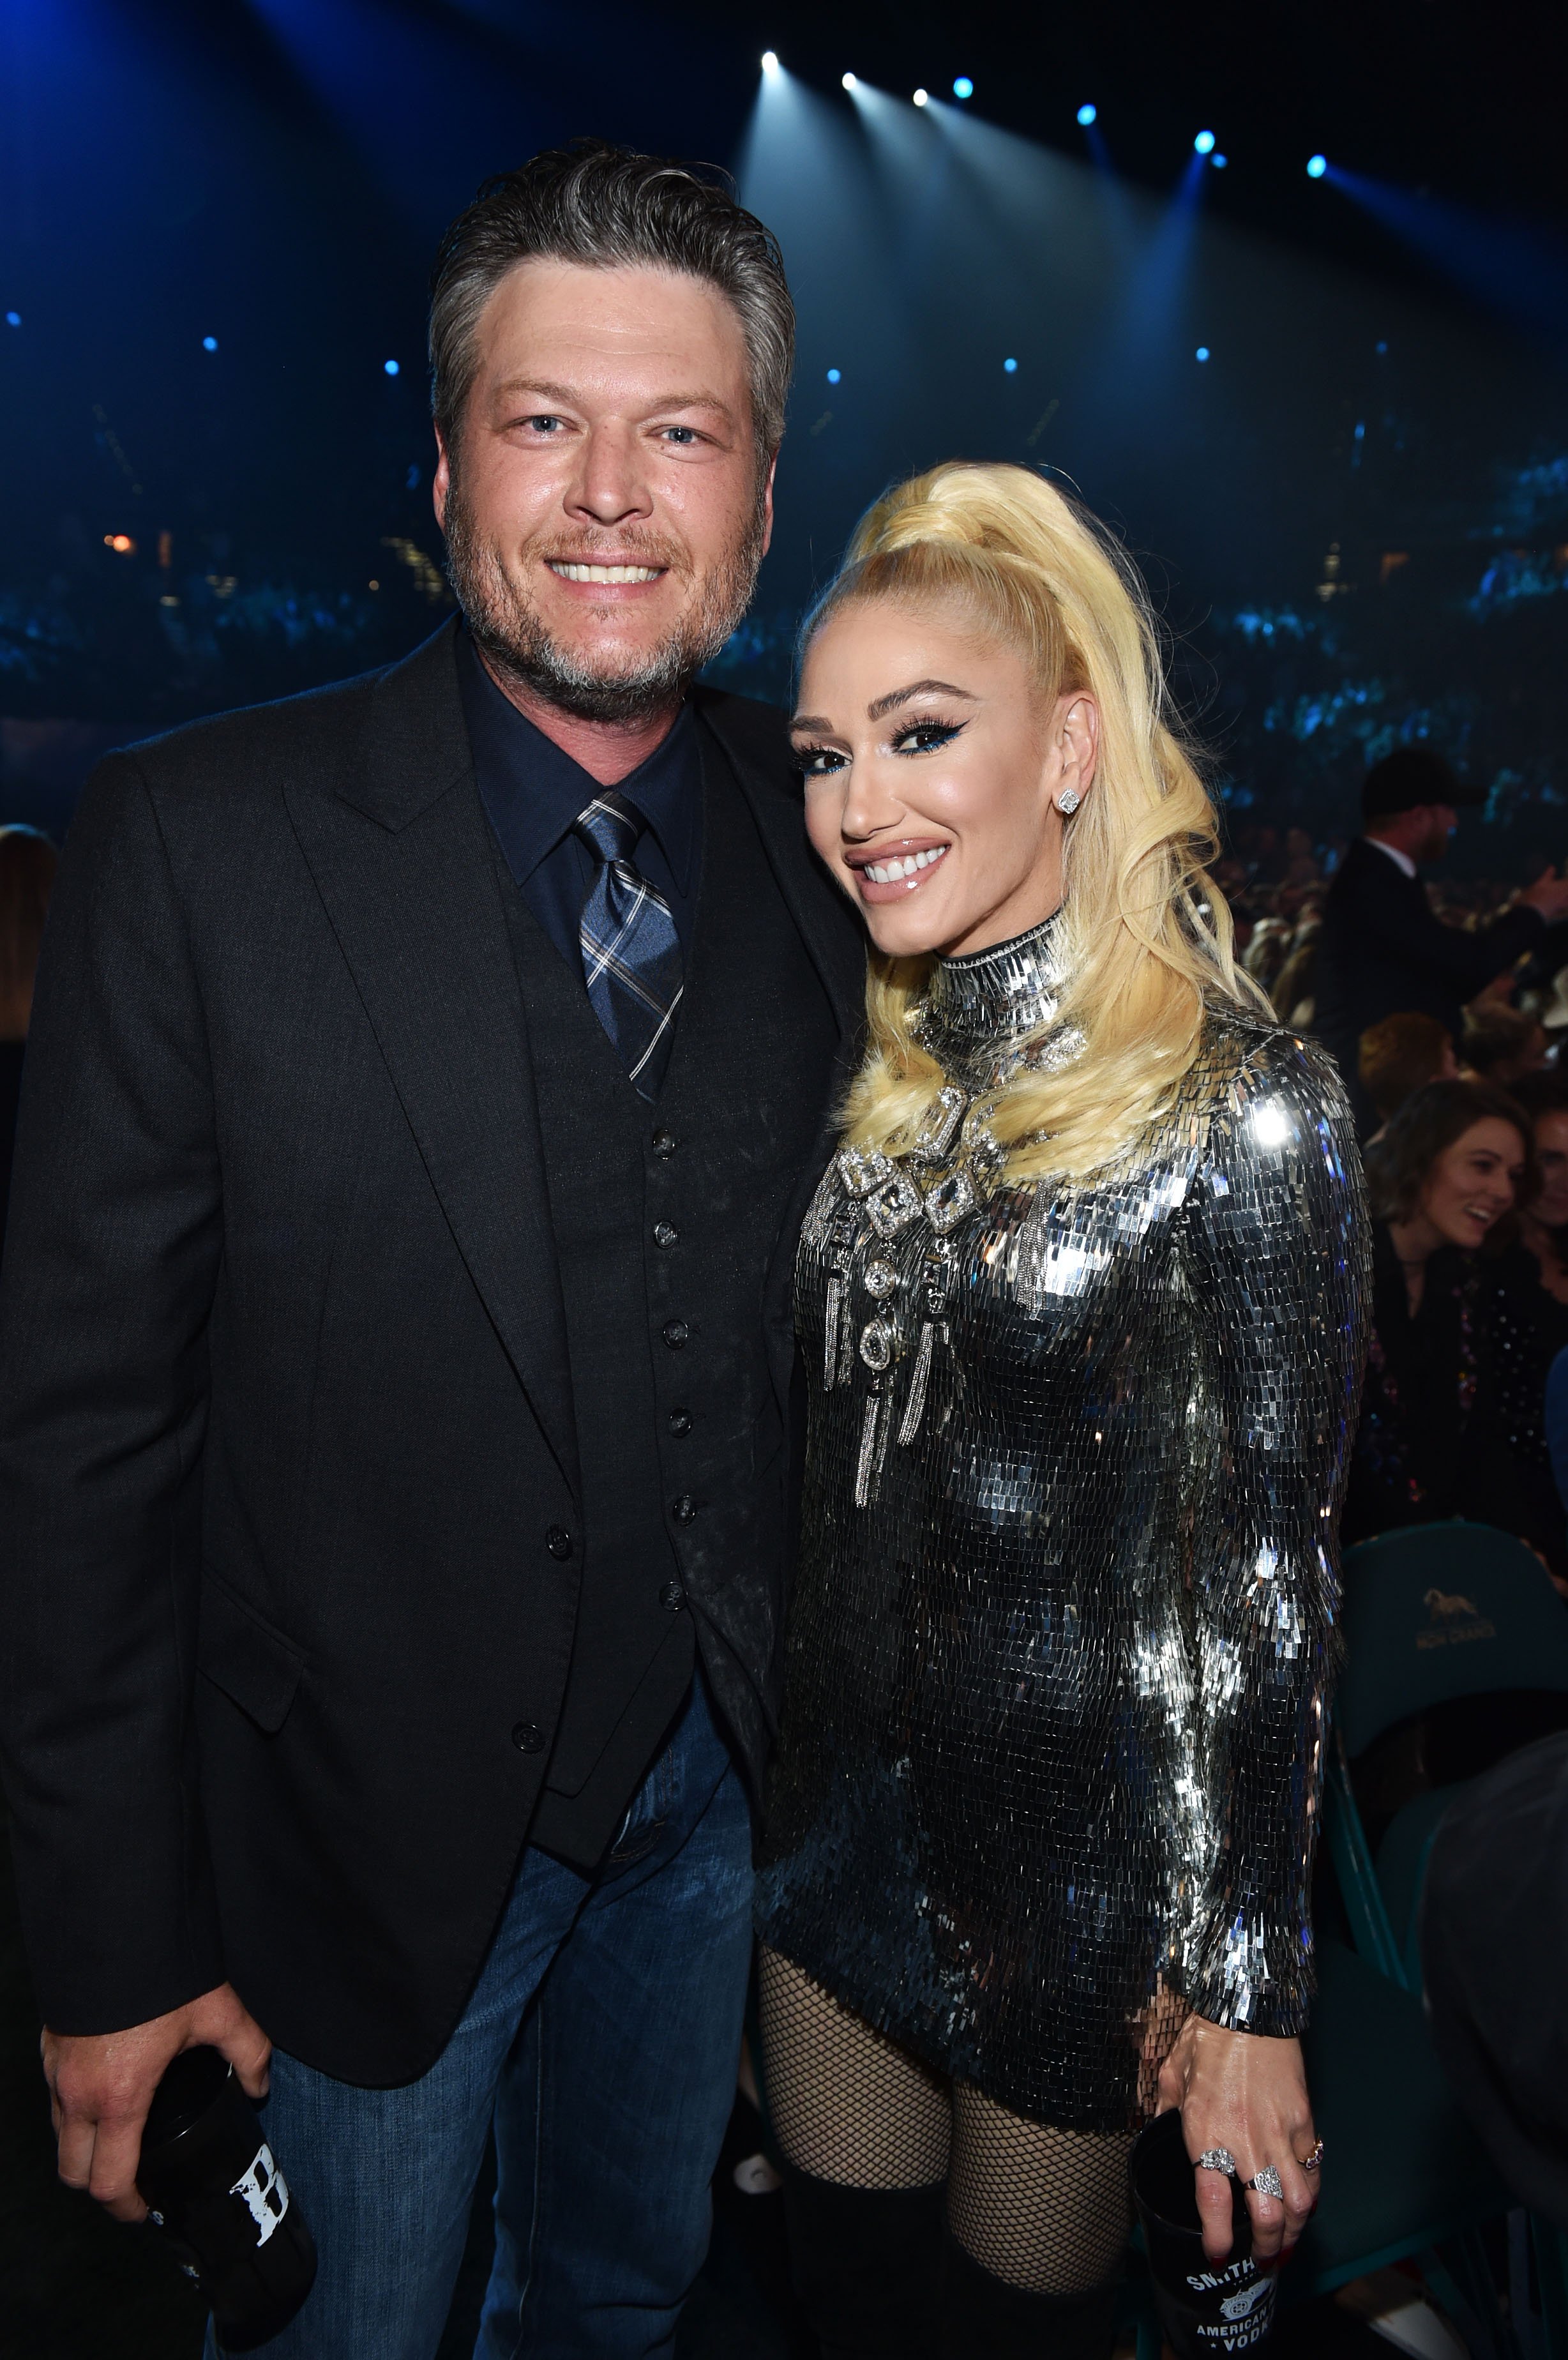 Blake Shelton and Gwen Stefani pose during the 54th Academy Of Country Music Awards. | Photo: GettyImages